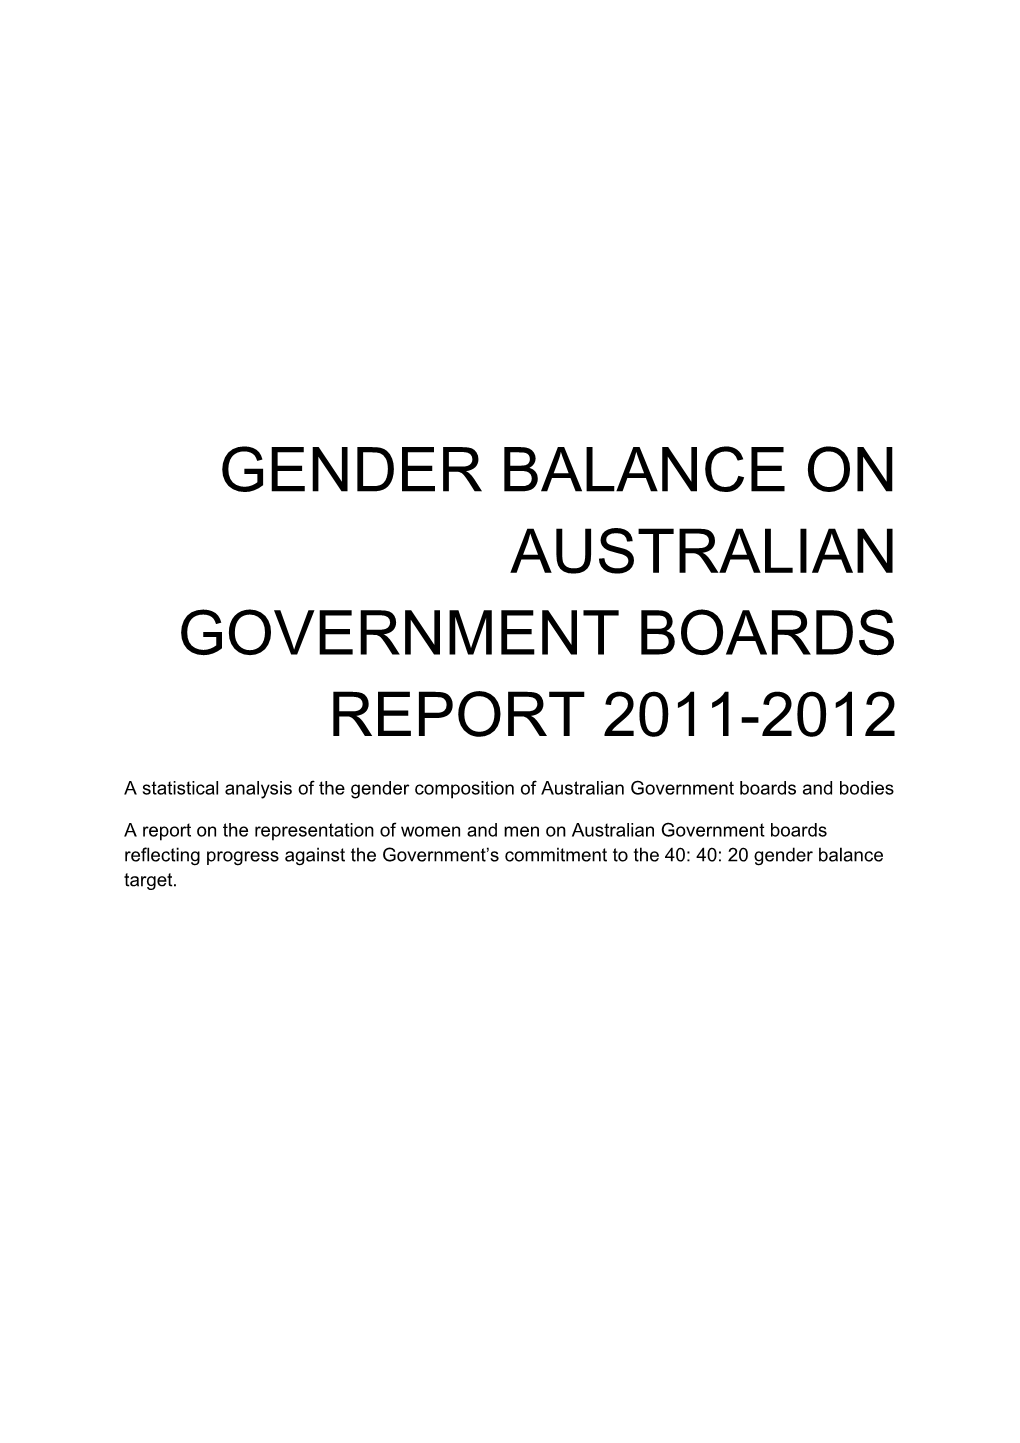 FOREWORD by the Minister for the Status of Women